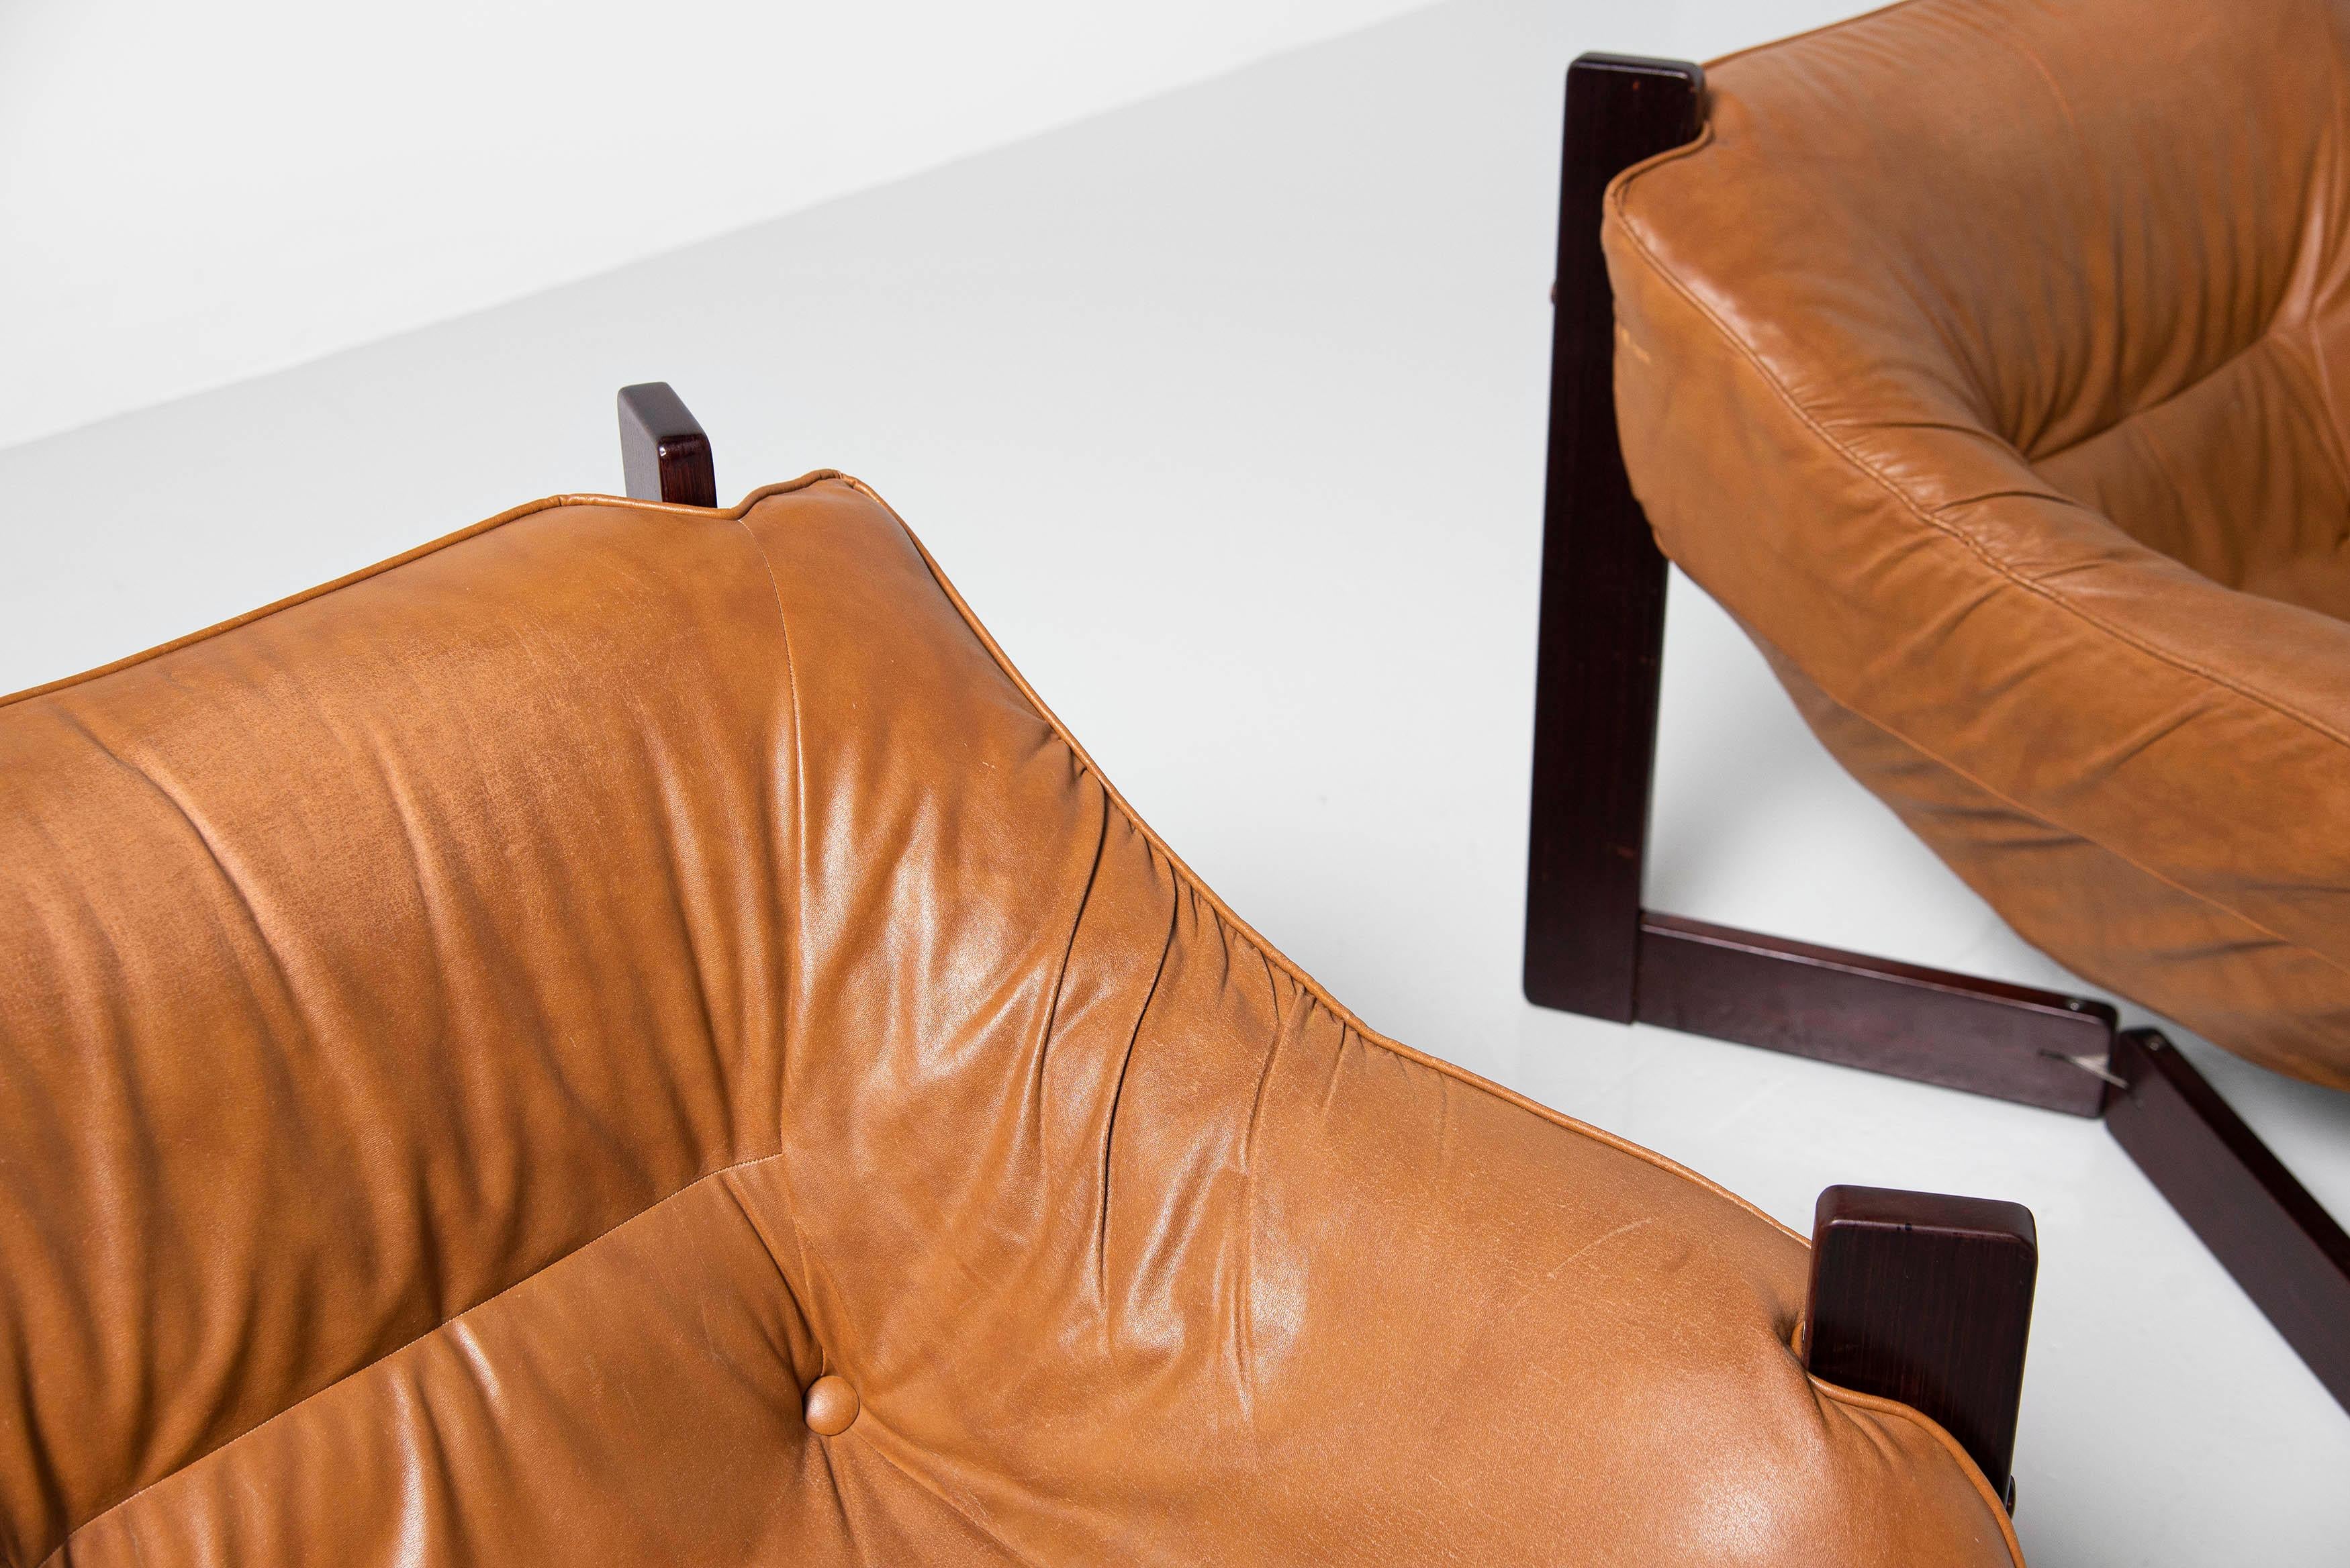 Brazilian Percival Lafer Lounge Chairs in Mahogany & Leather Brazil, 1970